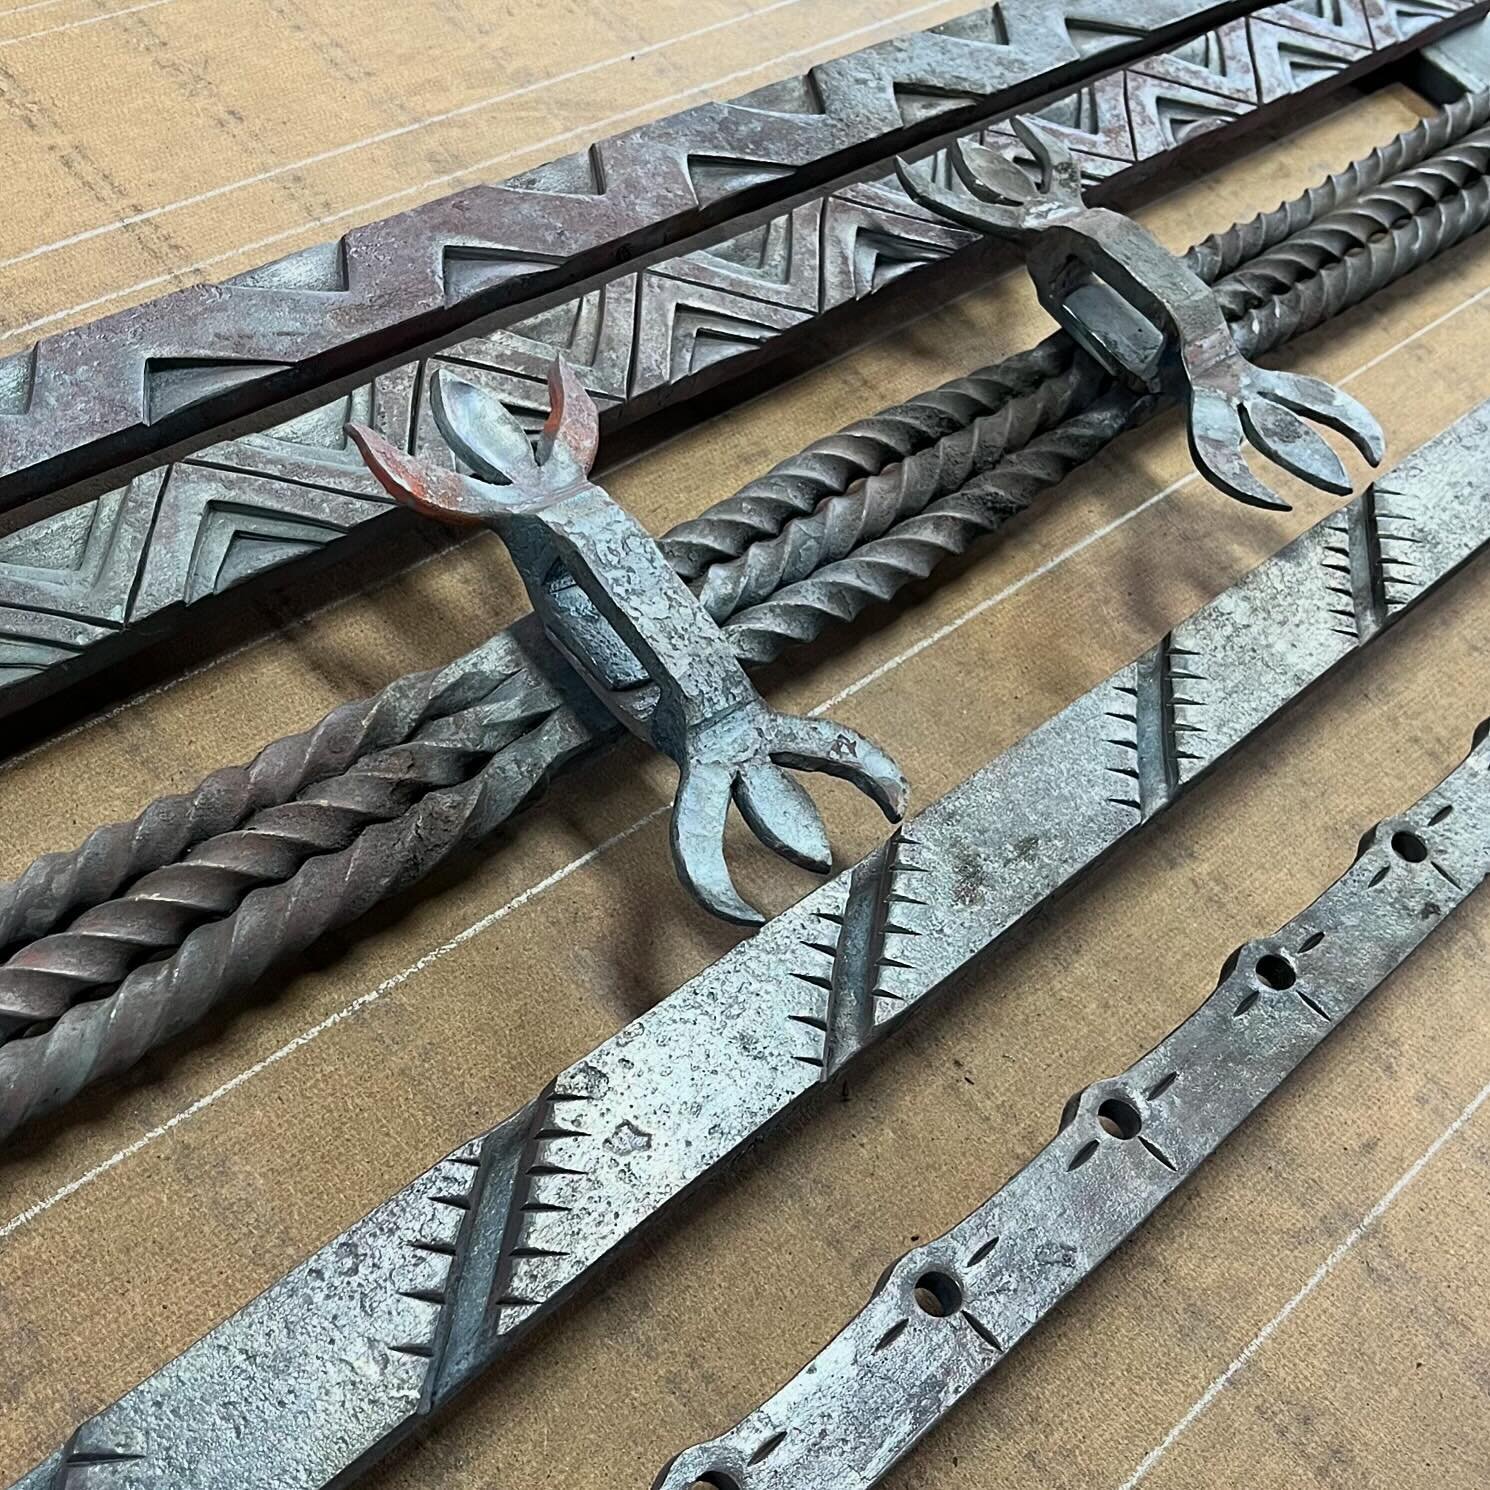 Our next project is a door made from patterned and ornamented bars. 😊 Dreams do come true in Detroit!

#Detroit #blacksmith #madeindetroit #craft #handmade #doordesign #steel #forging #forged #forgewelding #pattern #ironwork #metalwork #metalworking